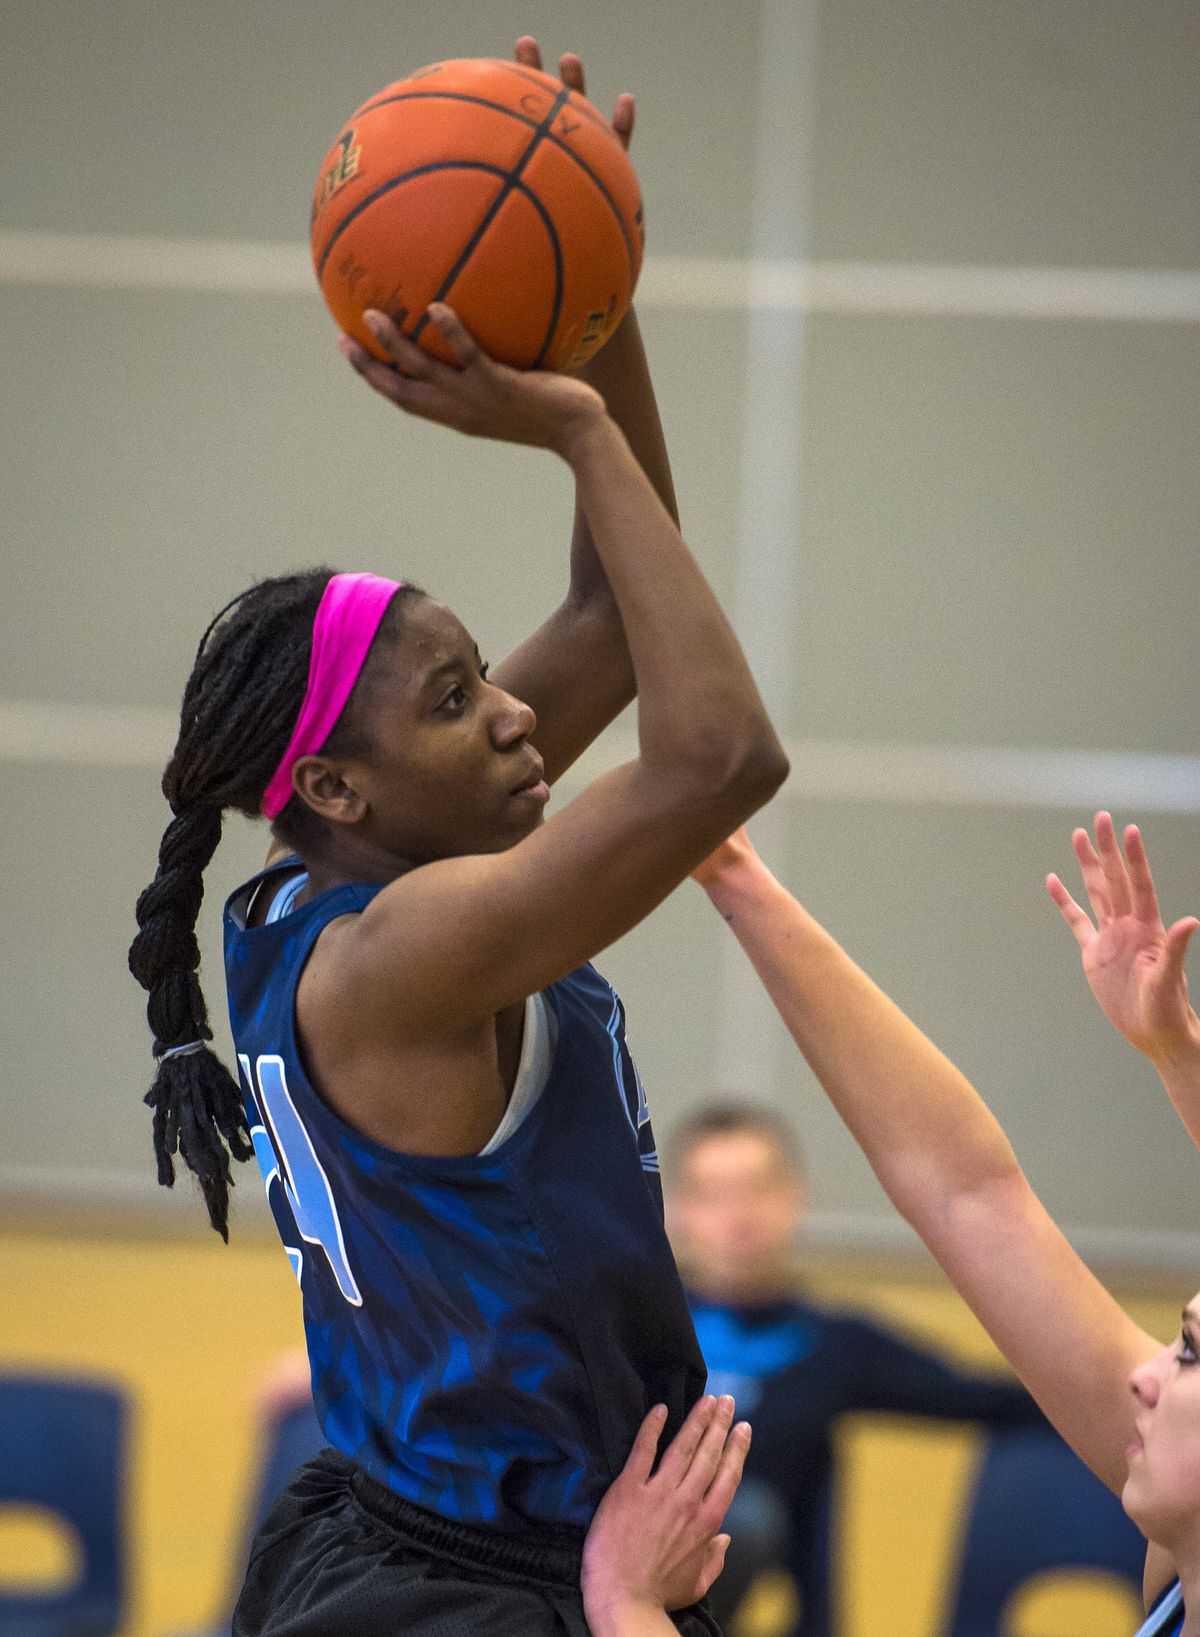 Mariah Cunningham, a four-year starter at Central Valley, will play for Eastern next season. (Colin Mulvany)